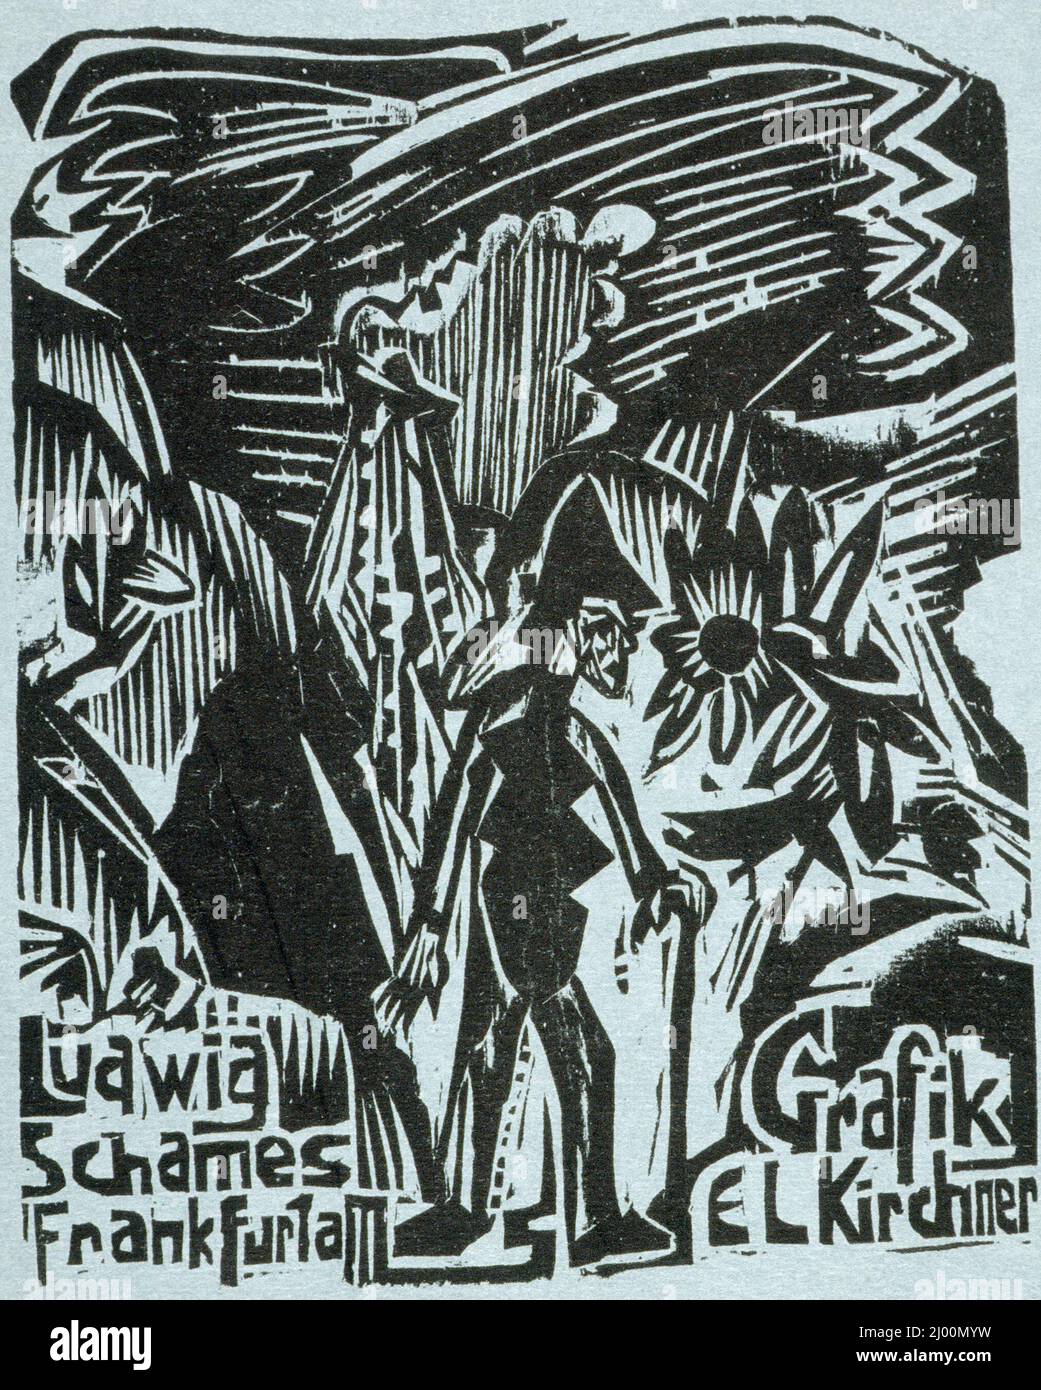 Ludwig Schames, Frankfurt a. M.: Graphics by E. L. Kirchner. Ernst Ludwig Kirchner (Germany, 1880-1938). Germany, Frankfurt, 1920. Books. Printed material and three woodcuts on wove paper and cover stock Stock Photo